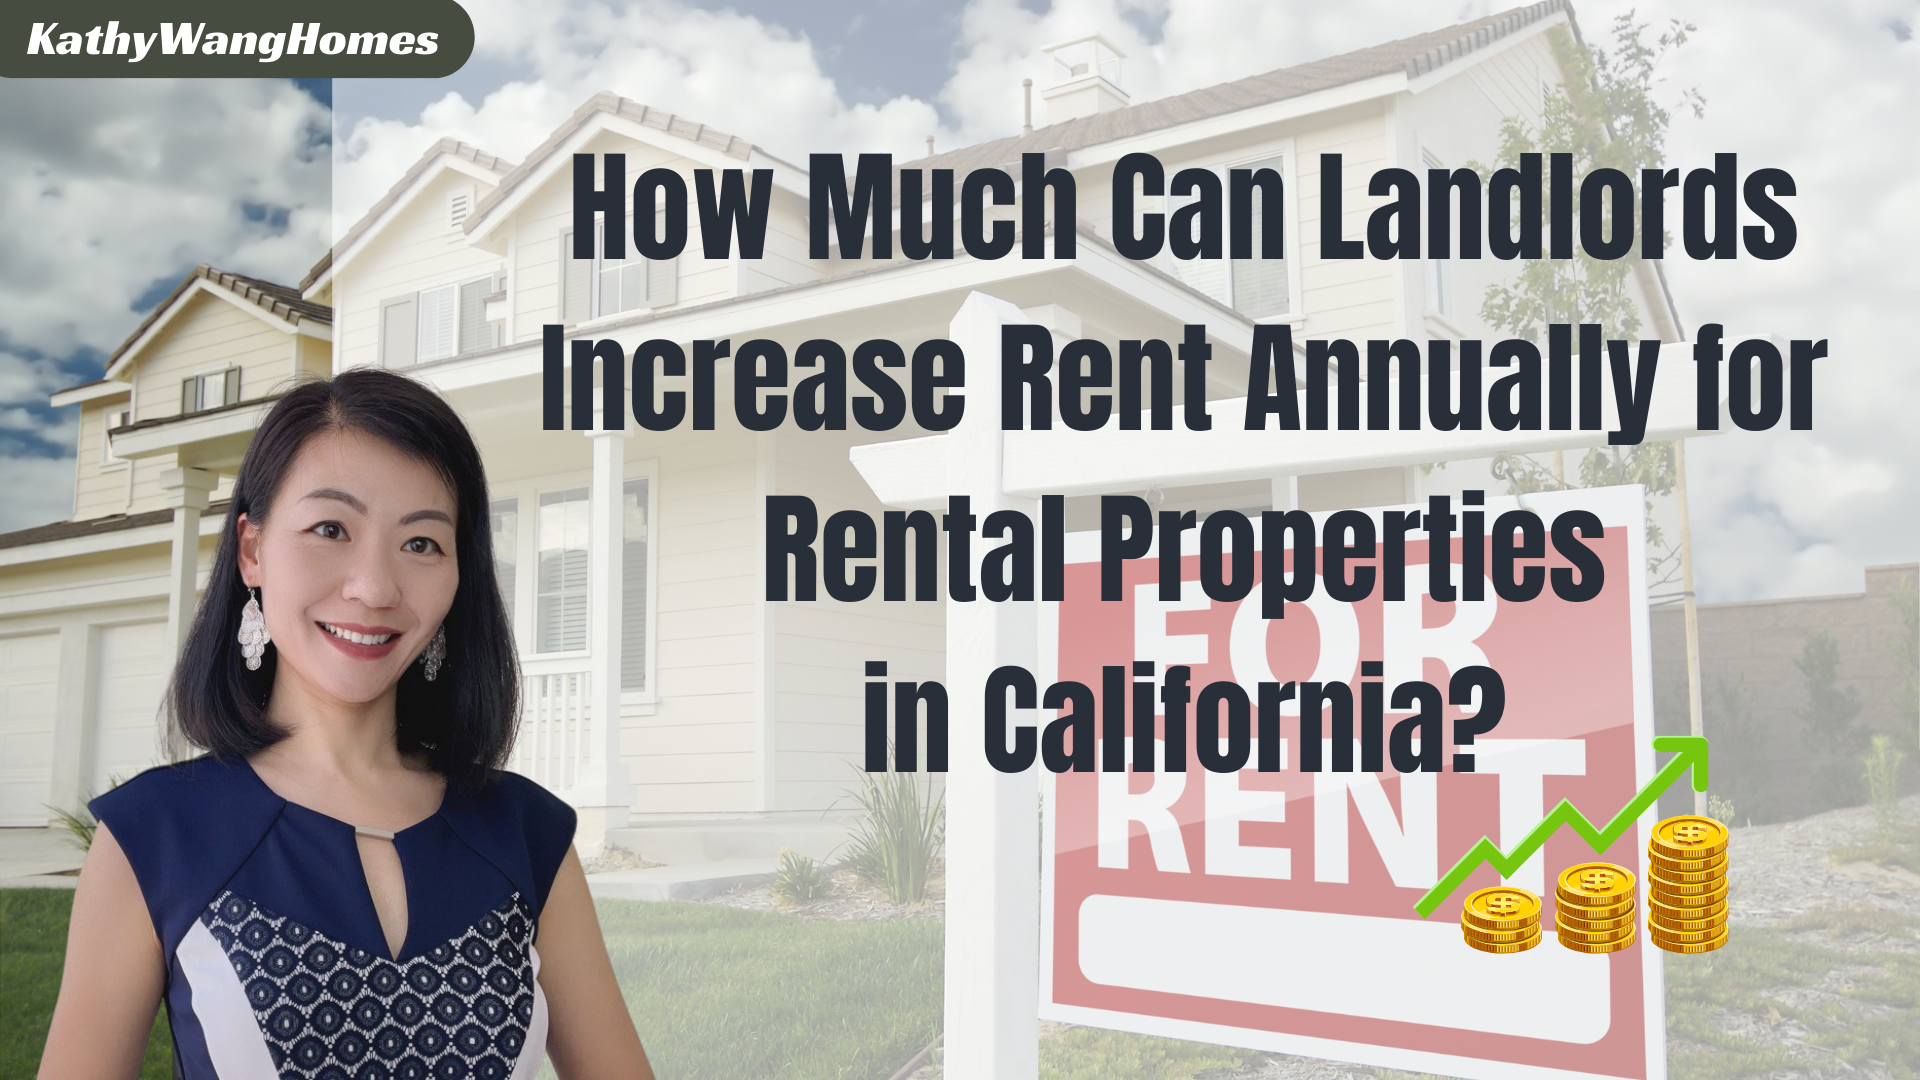 How Much Can Landlords Increase Rent Annually for Rental Properties in California?